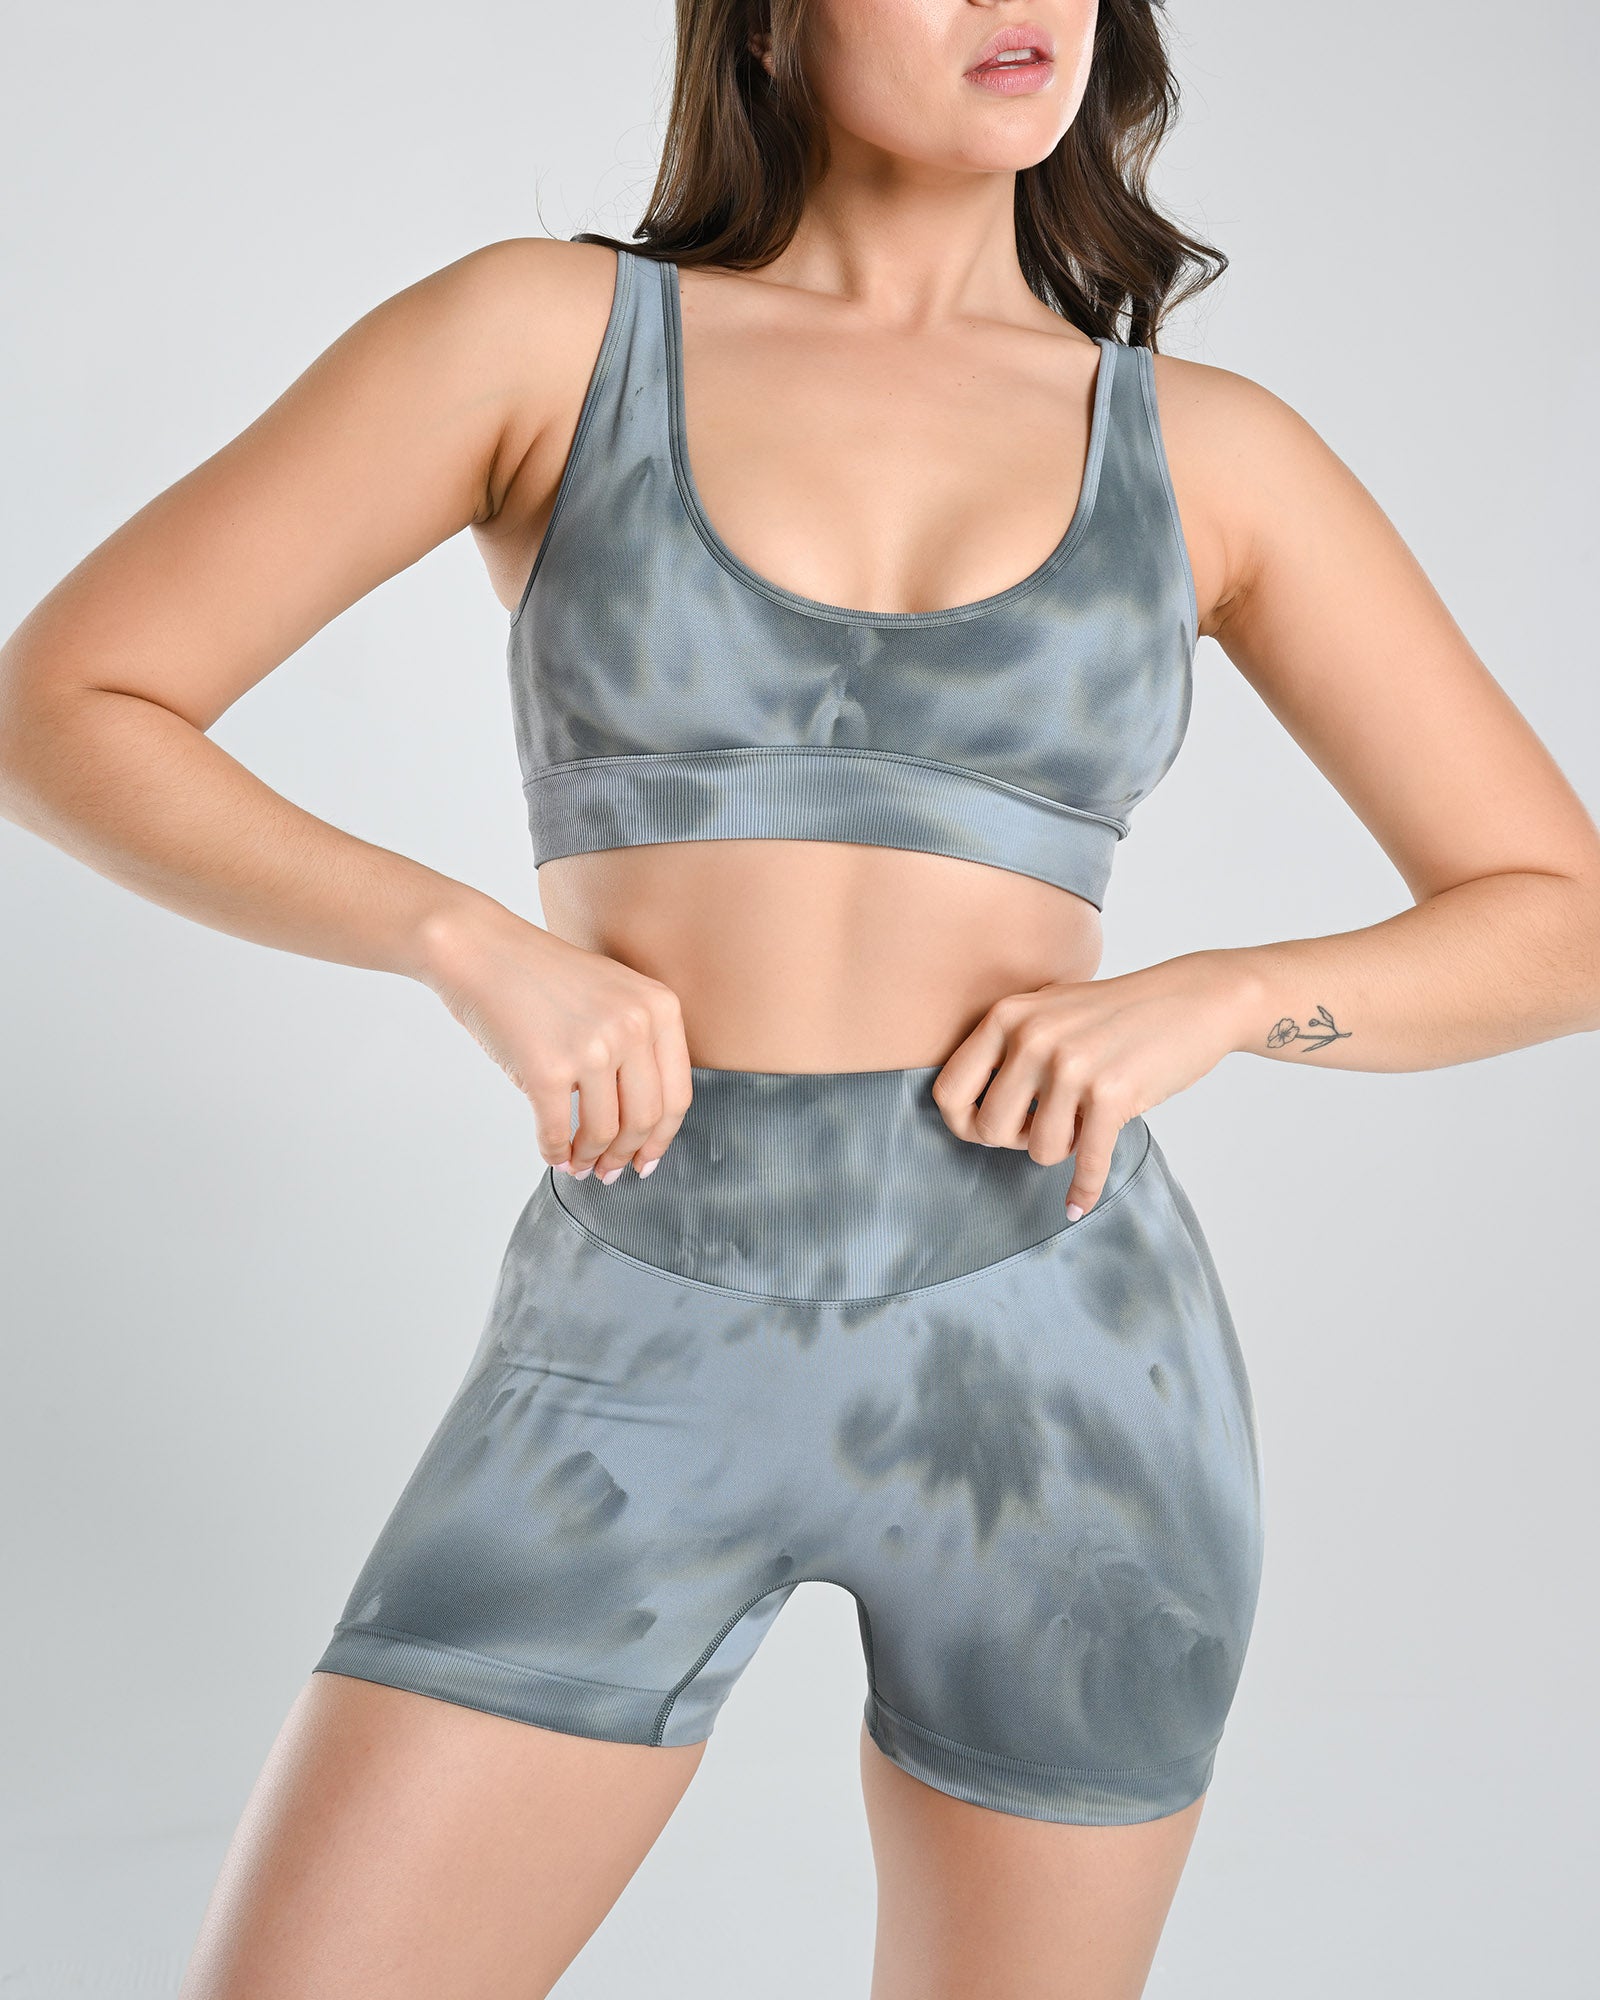 Cosmolle Activewear Fashion That Is Anything But Boring